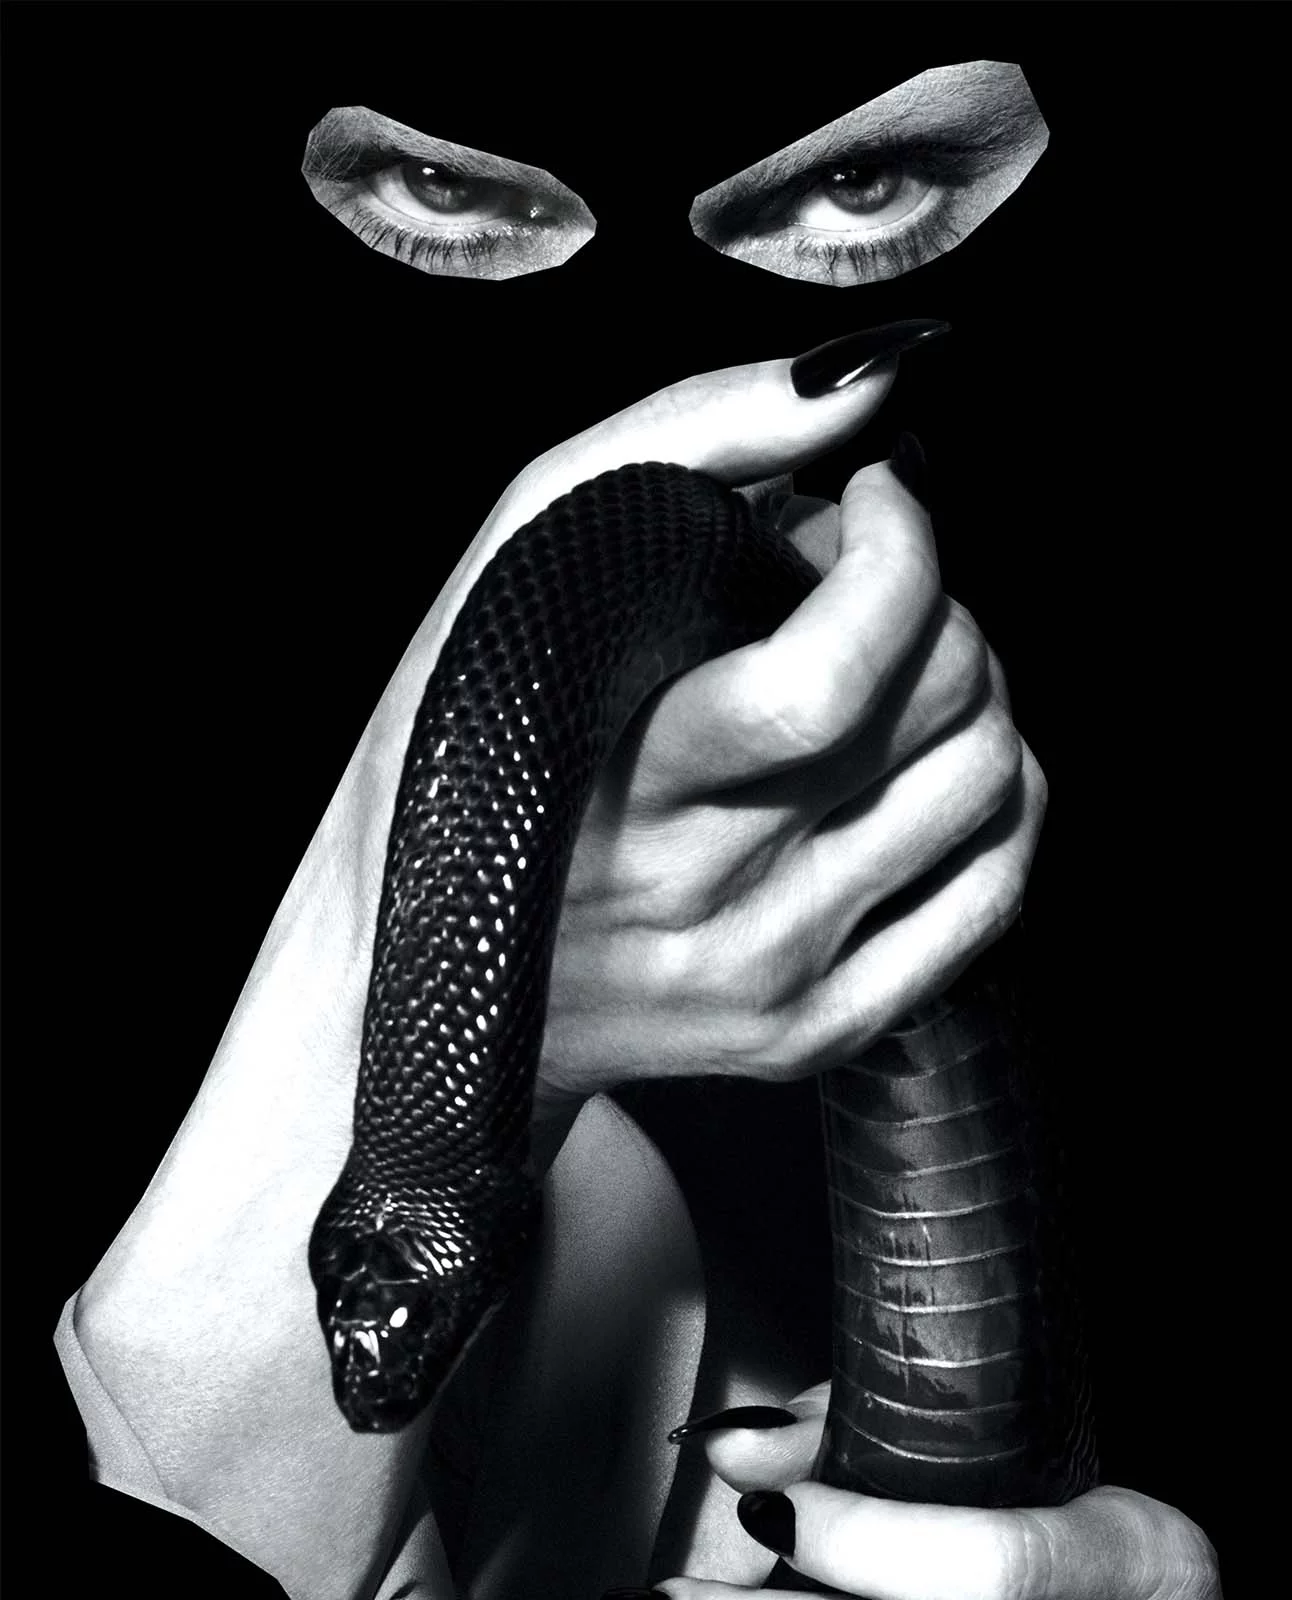 Rework x Madonna by Mert & Marcus by Portis WASP